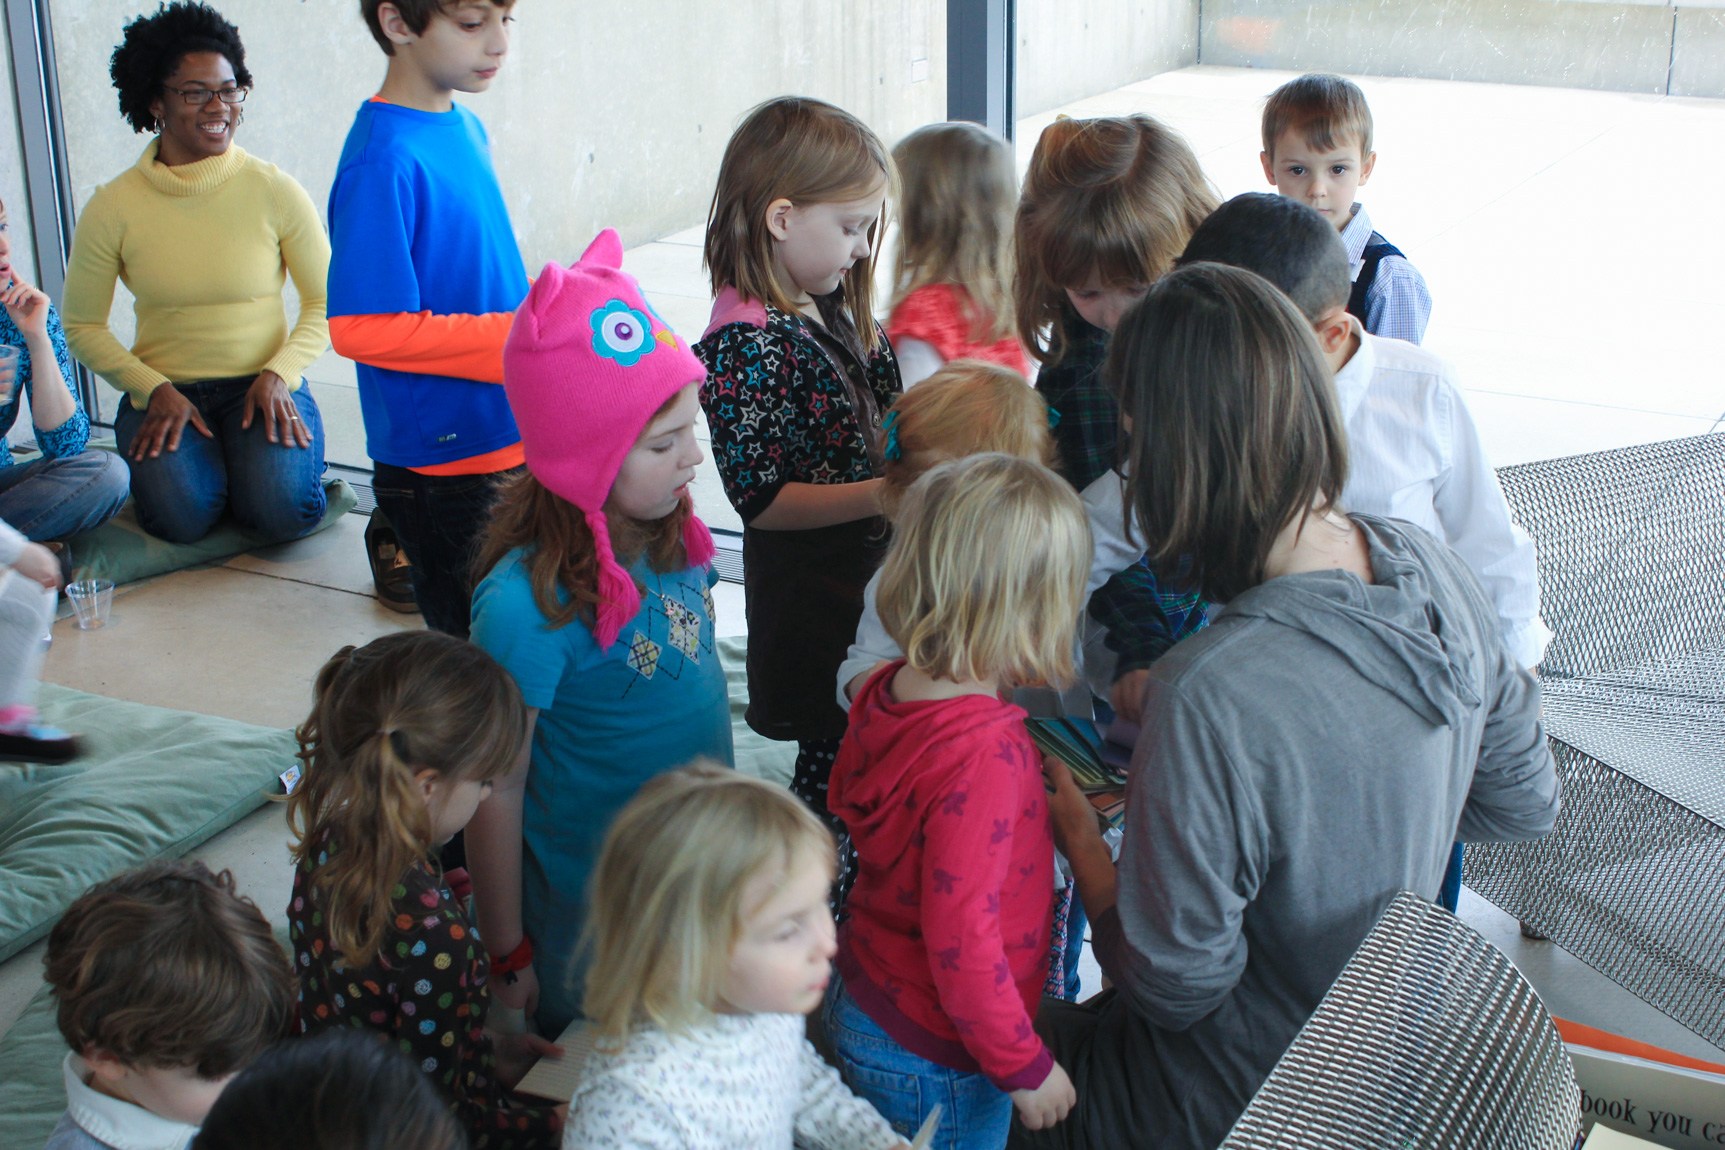 Children gather around a visitor reading a book in the Mezzanine while parents look on.